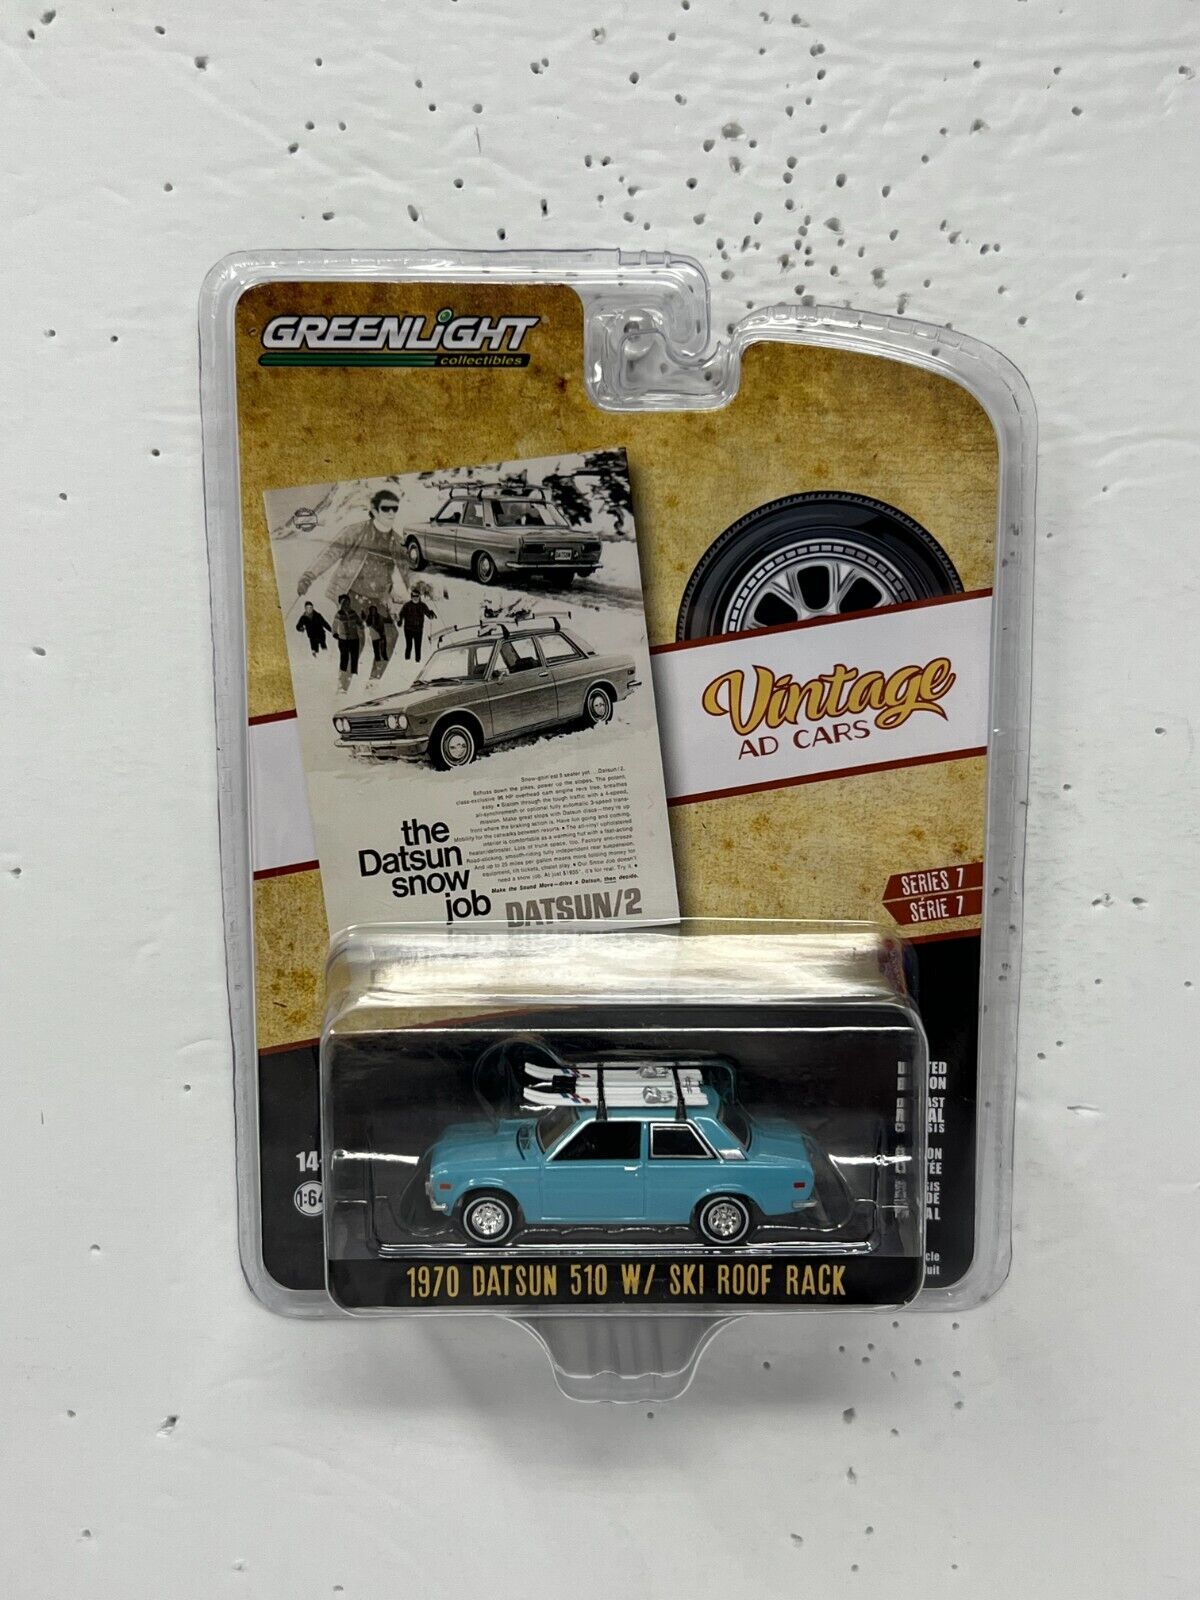 Greenlight Vintage Ad Cars 1970 Datsun 510 with Ski Roof Rack 1:64 Diecast